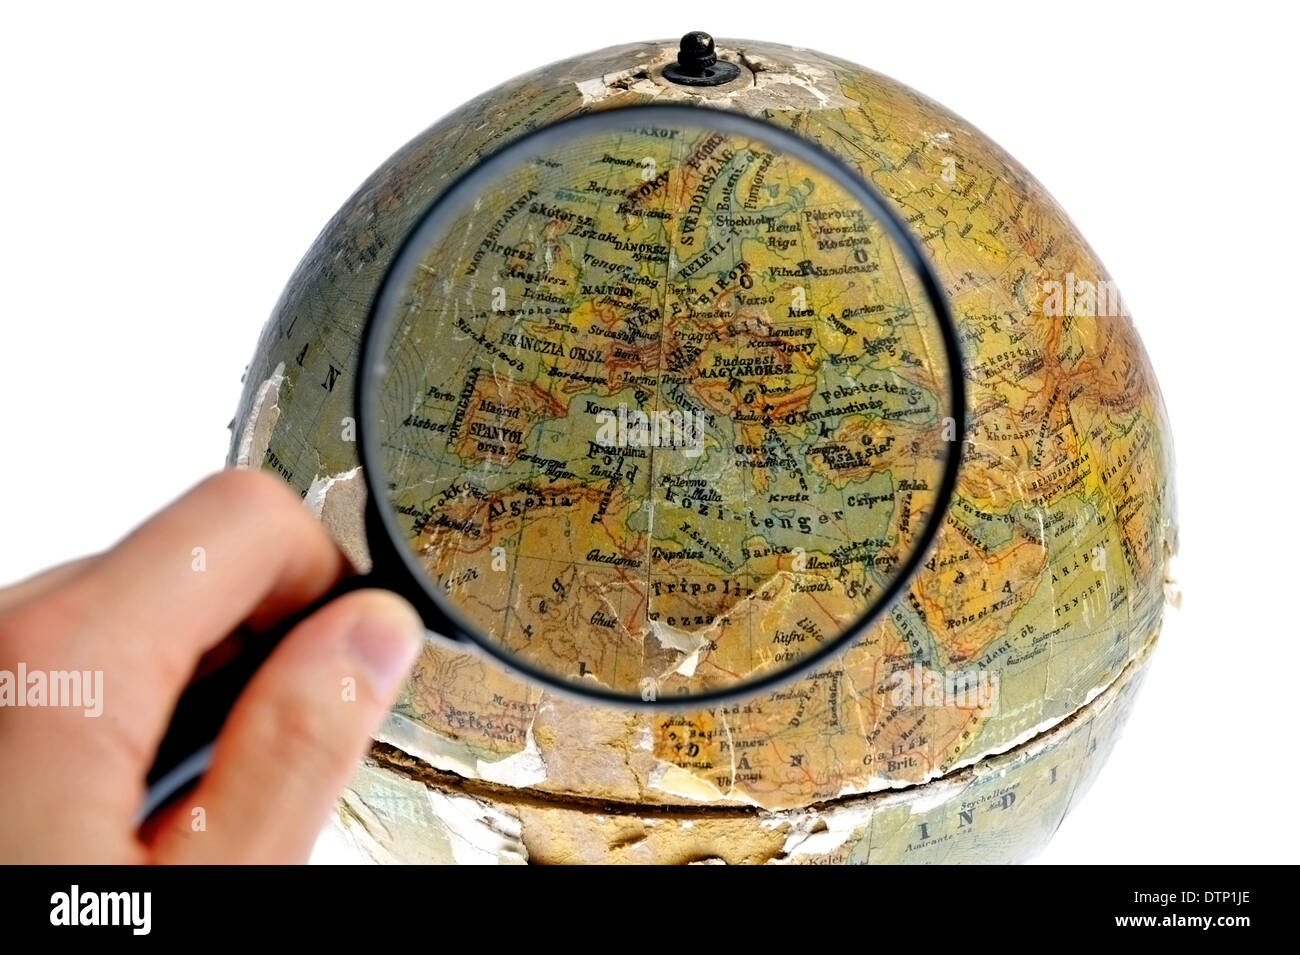 Hand holding a magnifier over an old rotating globe isolated on white background Stock Photo